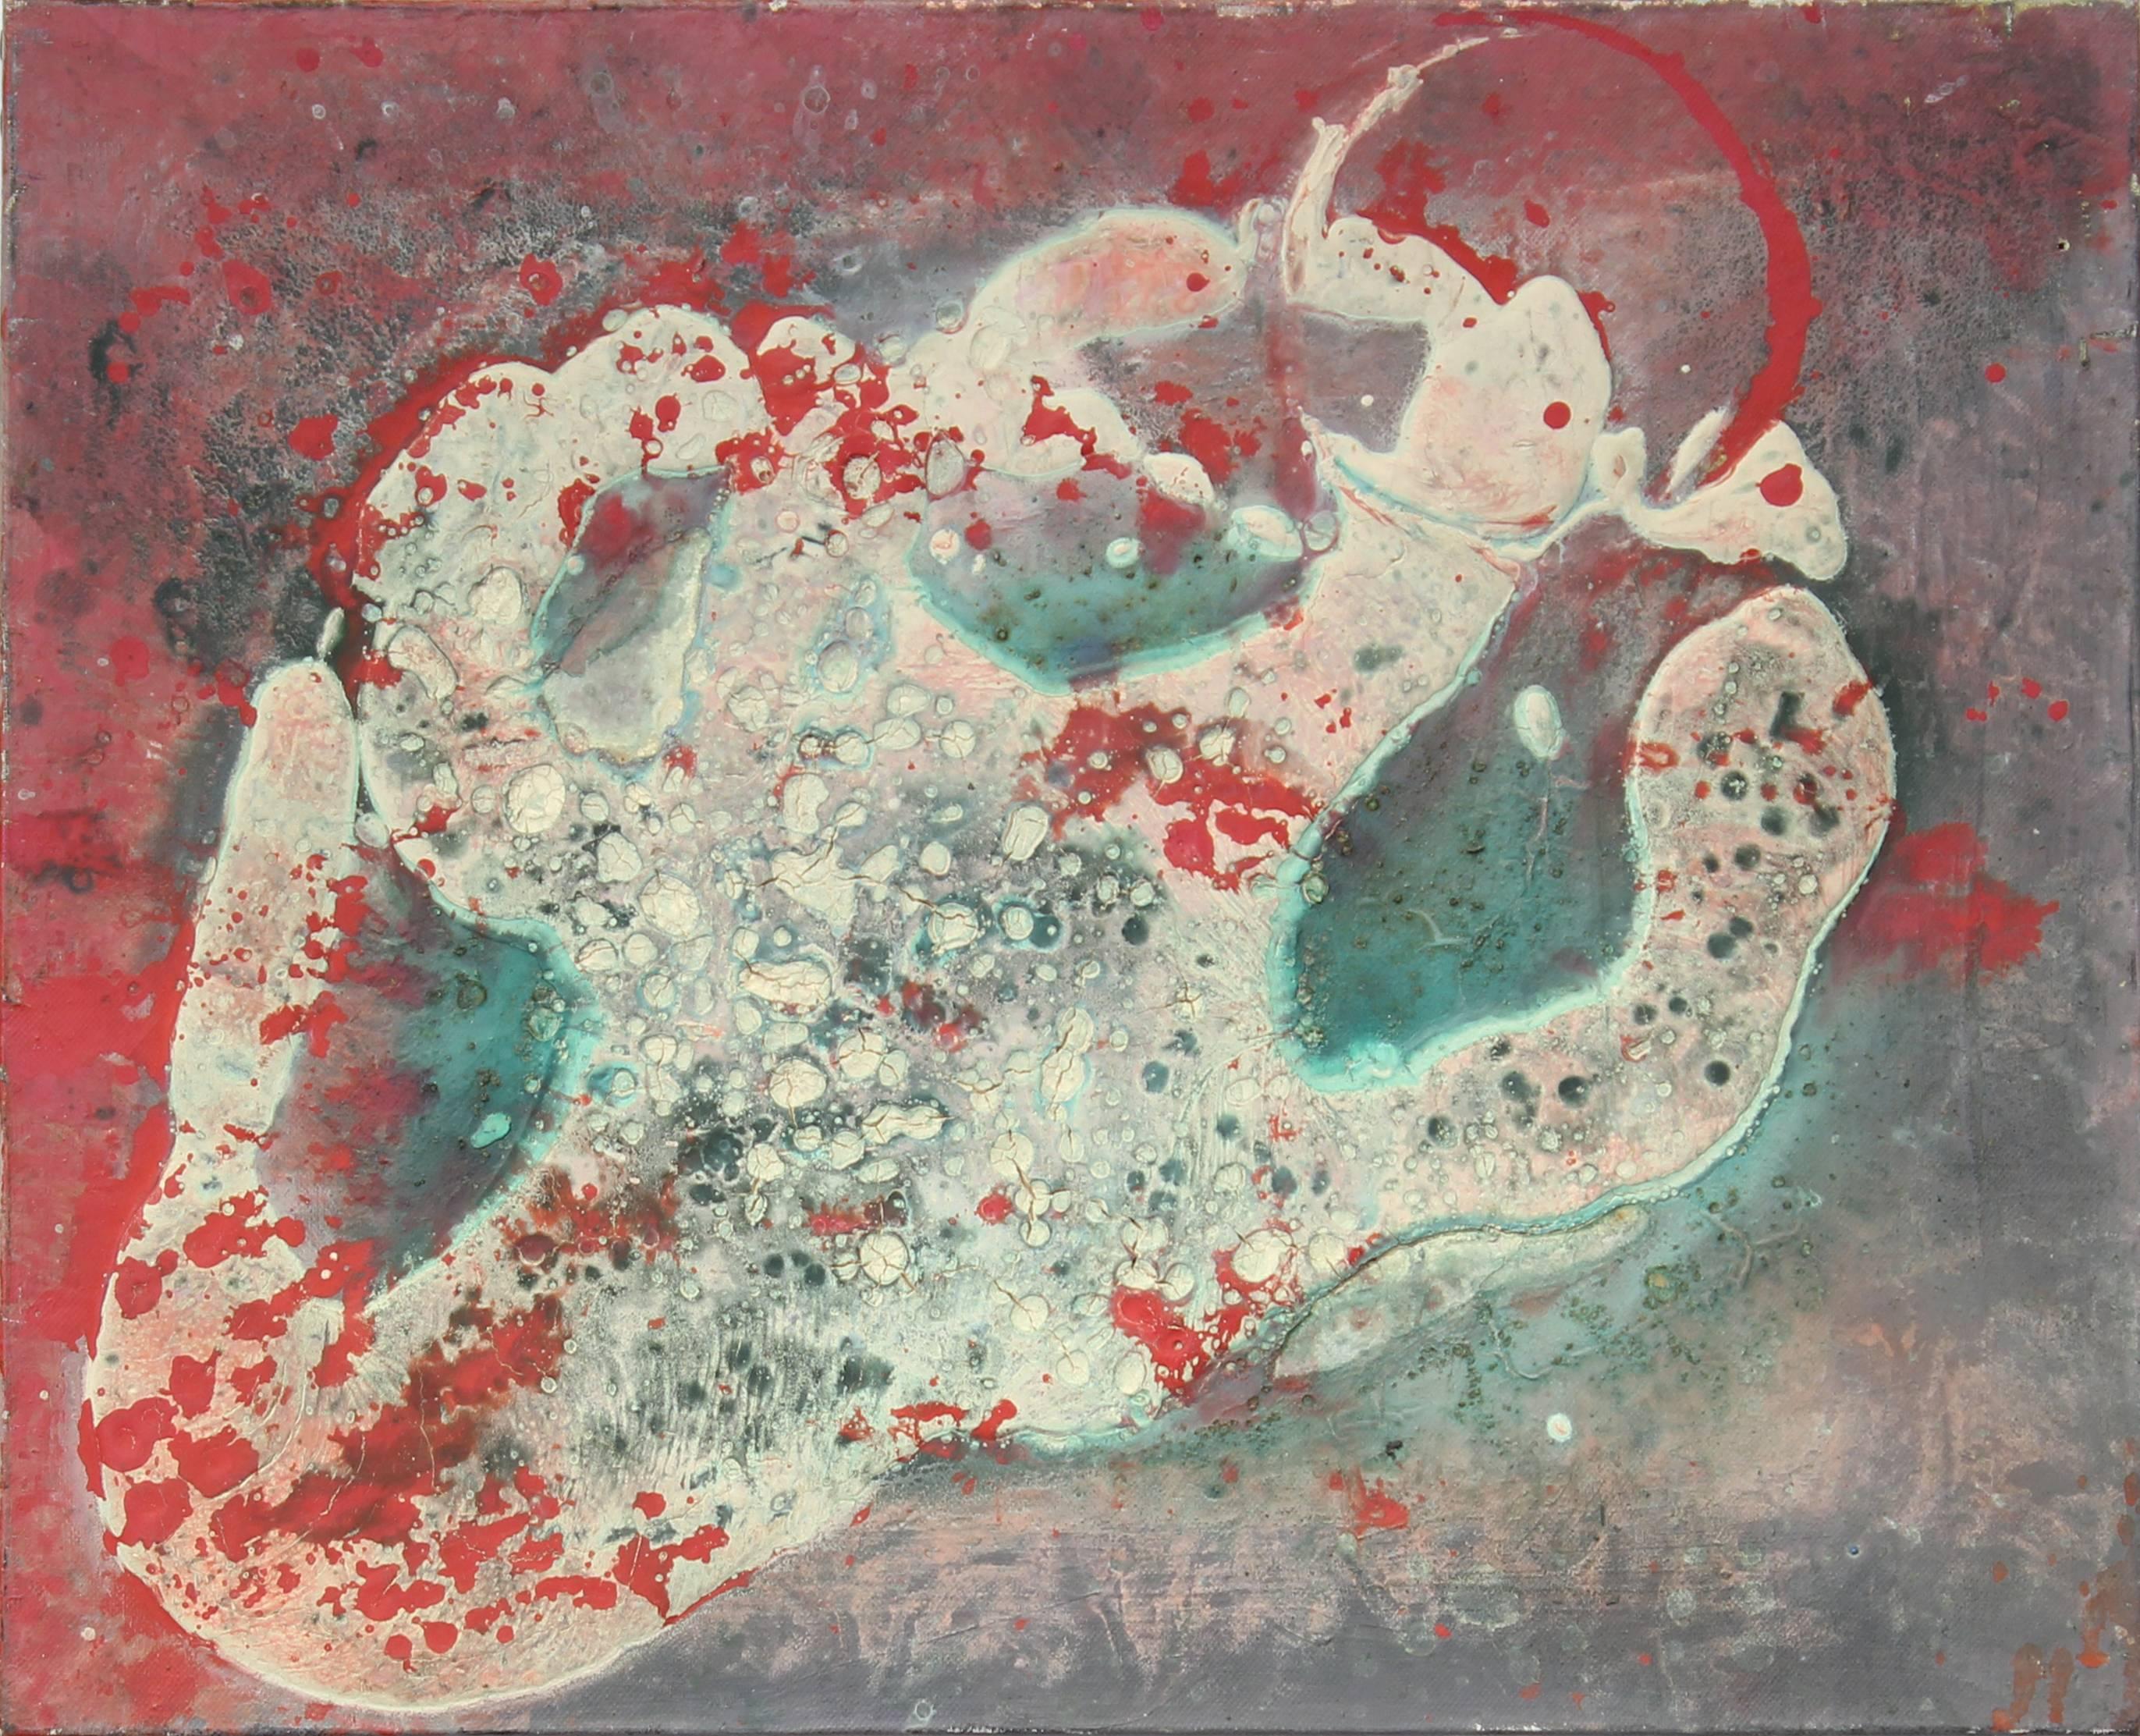 Textured Red, Green and White Amorphic Relief Abstract - Art by Petitjean-Sart